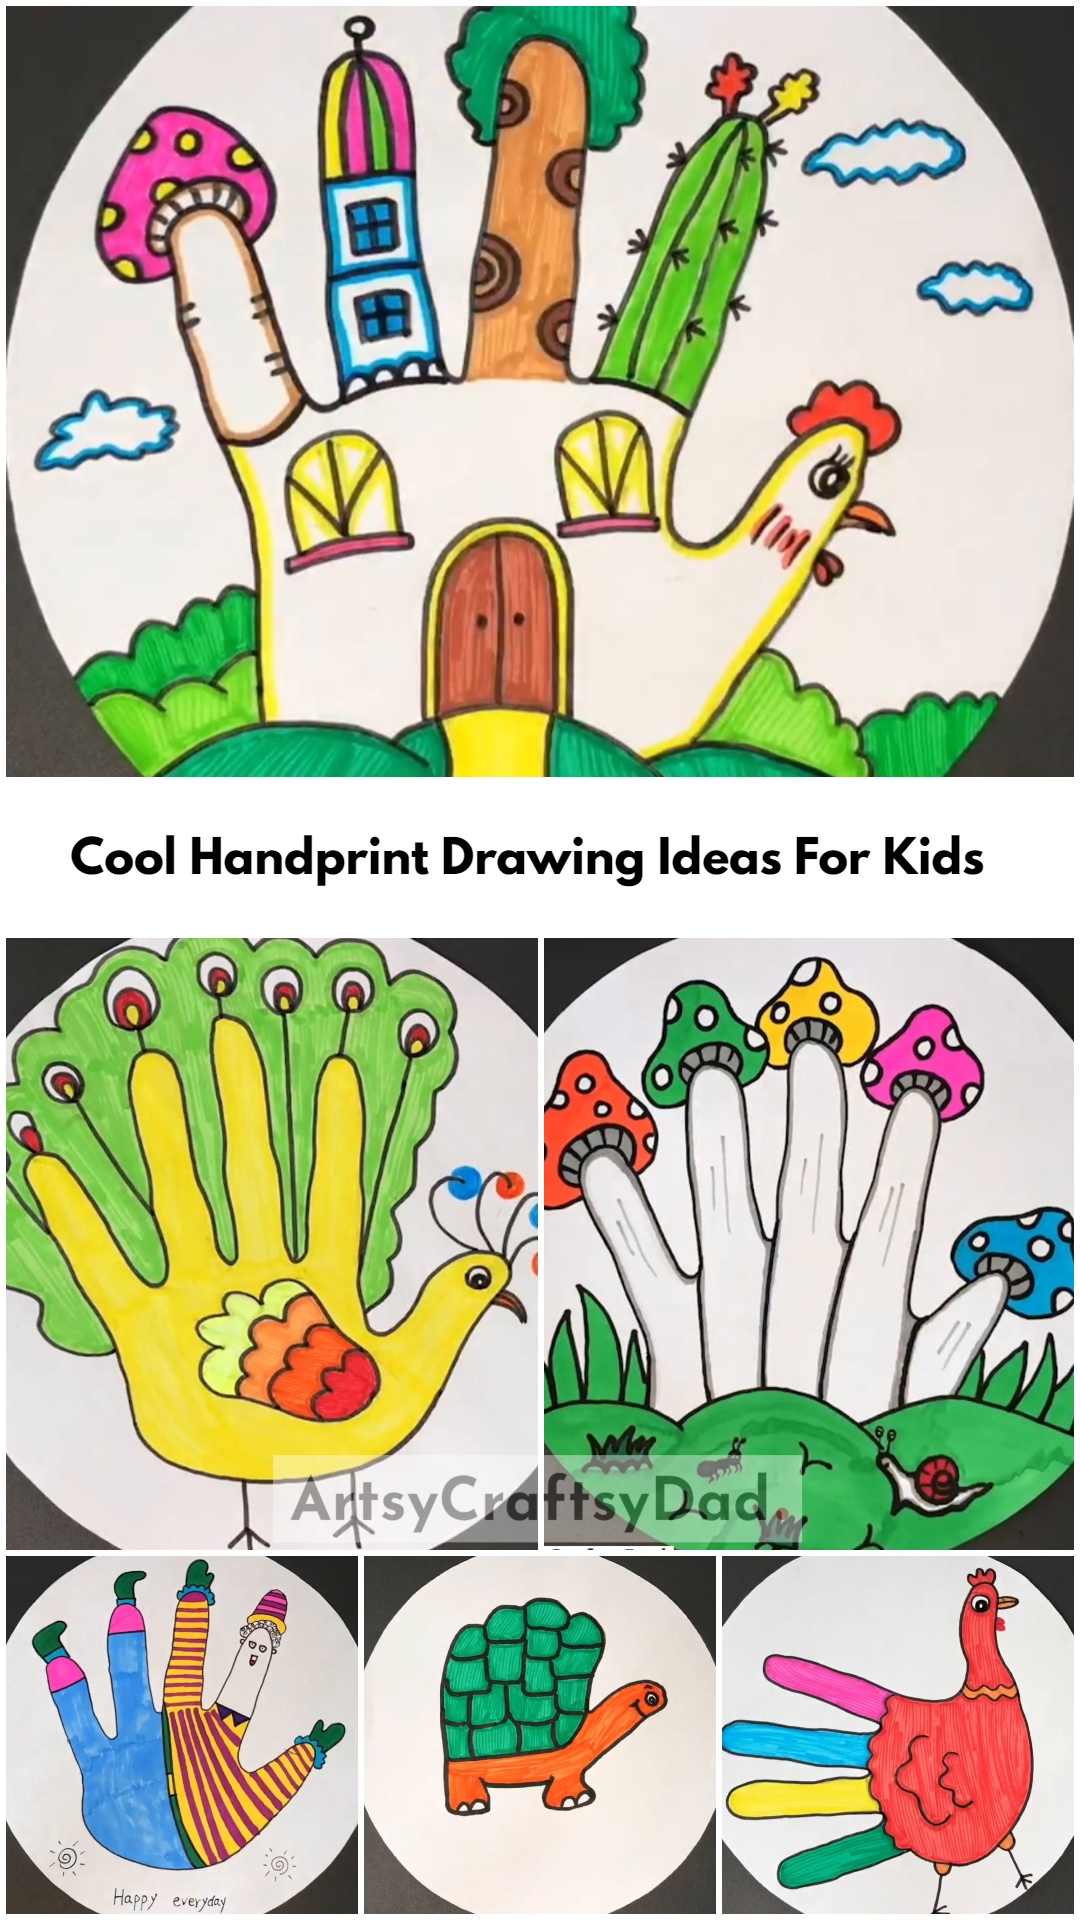 Cool Handprint Drawing Ideas For Kids Age 9-12 Years